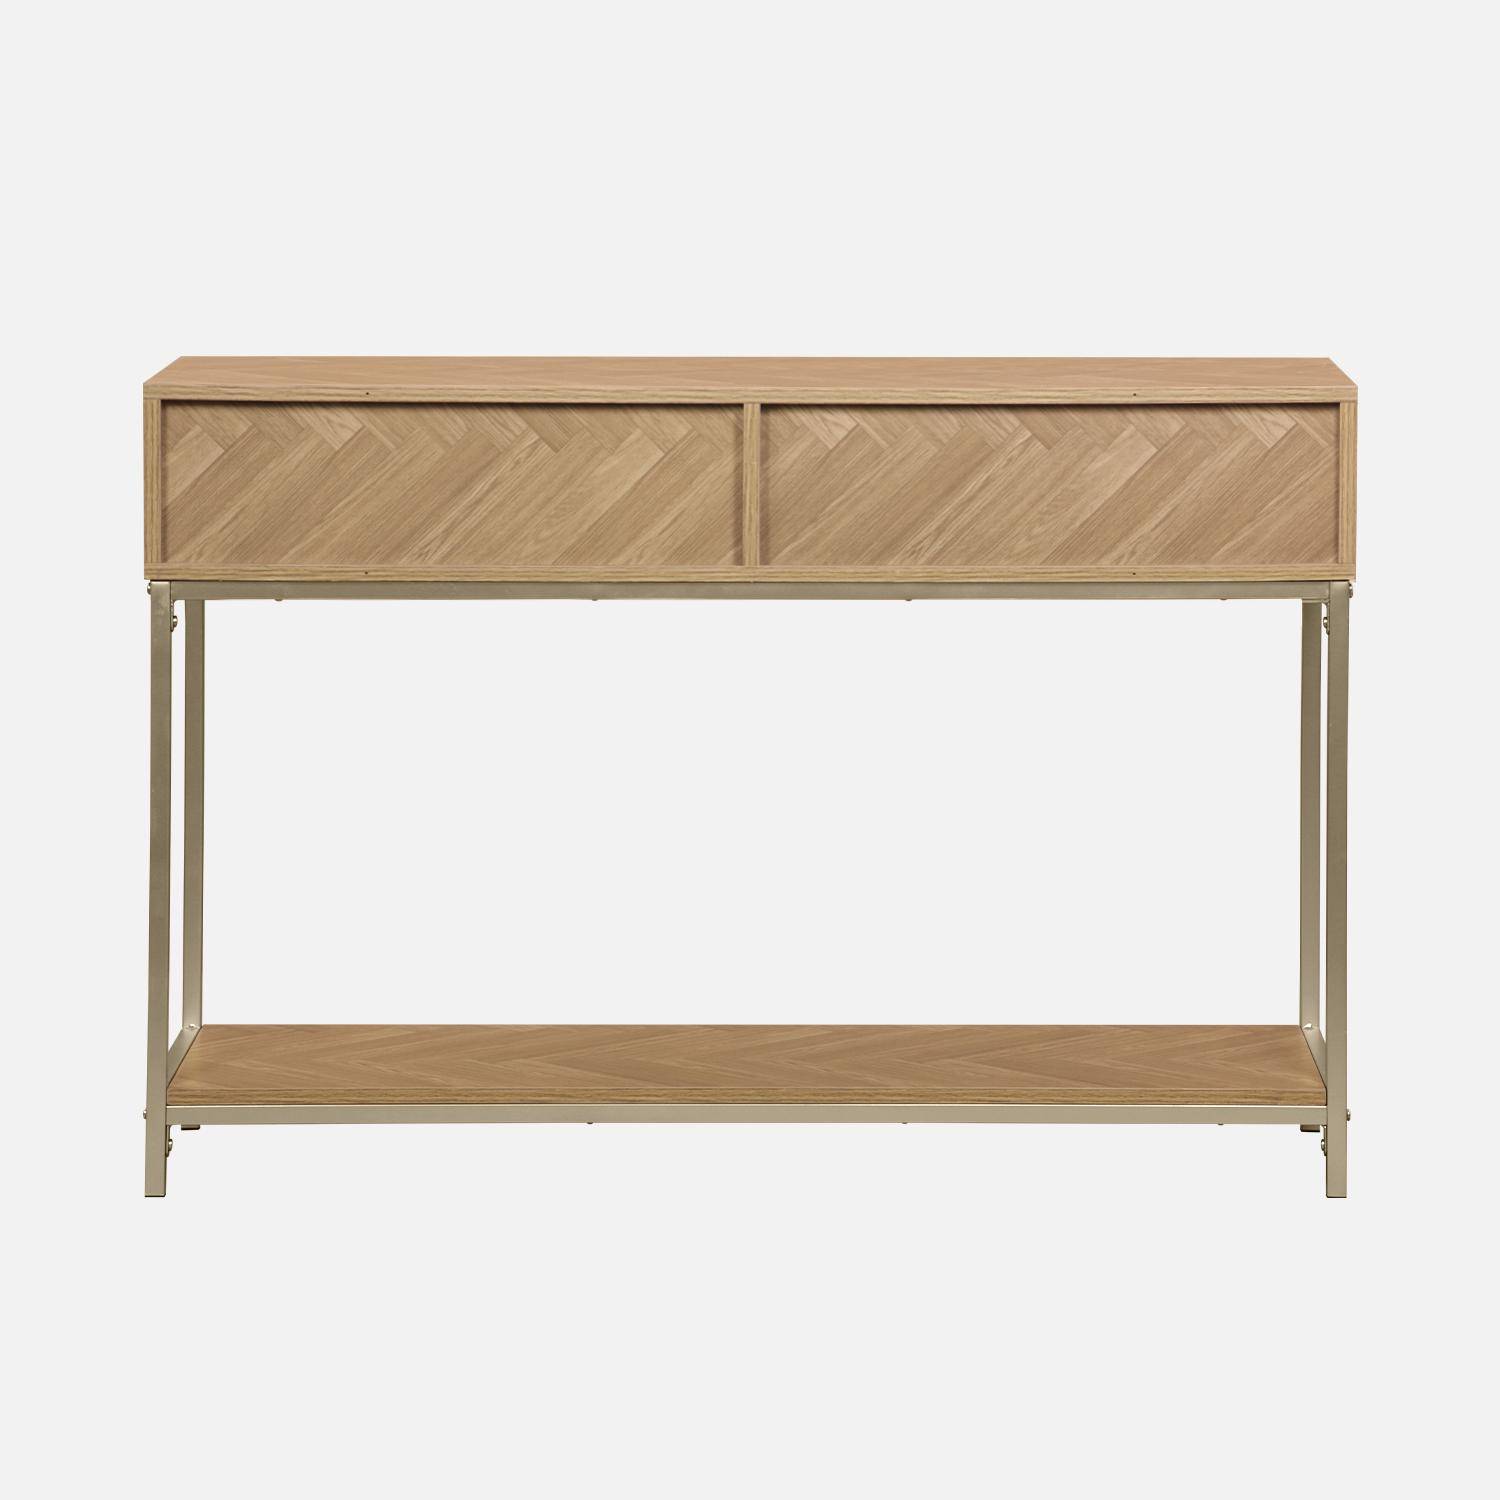 Herringbone hallway console table with 2 drawers, 110x35x75cm - Budapest - Natural,sweeek,Photo7